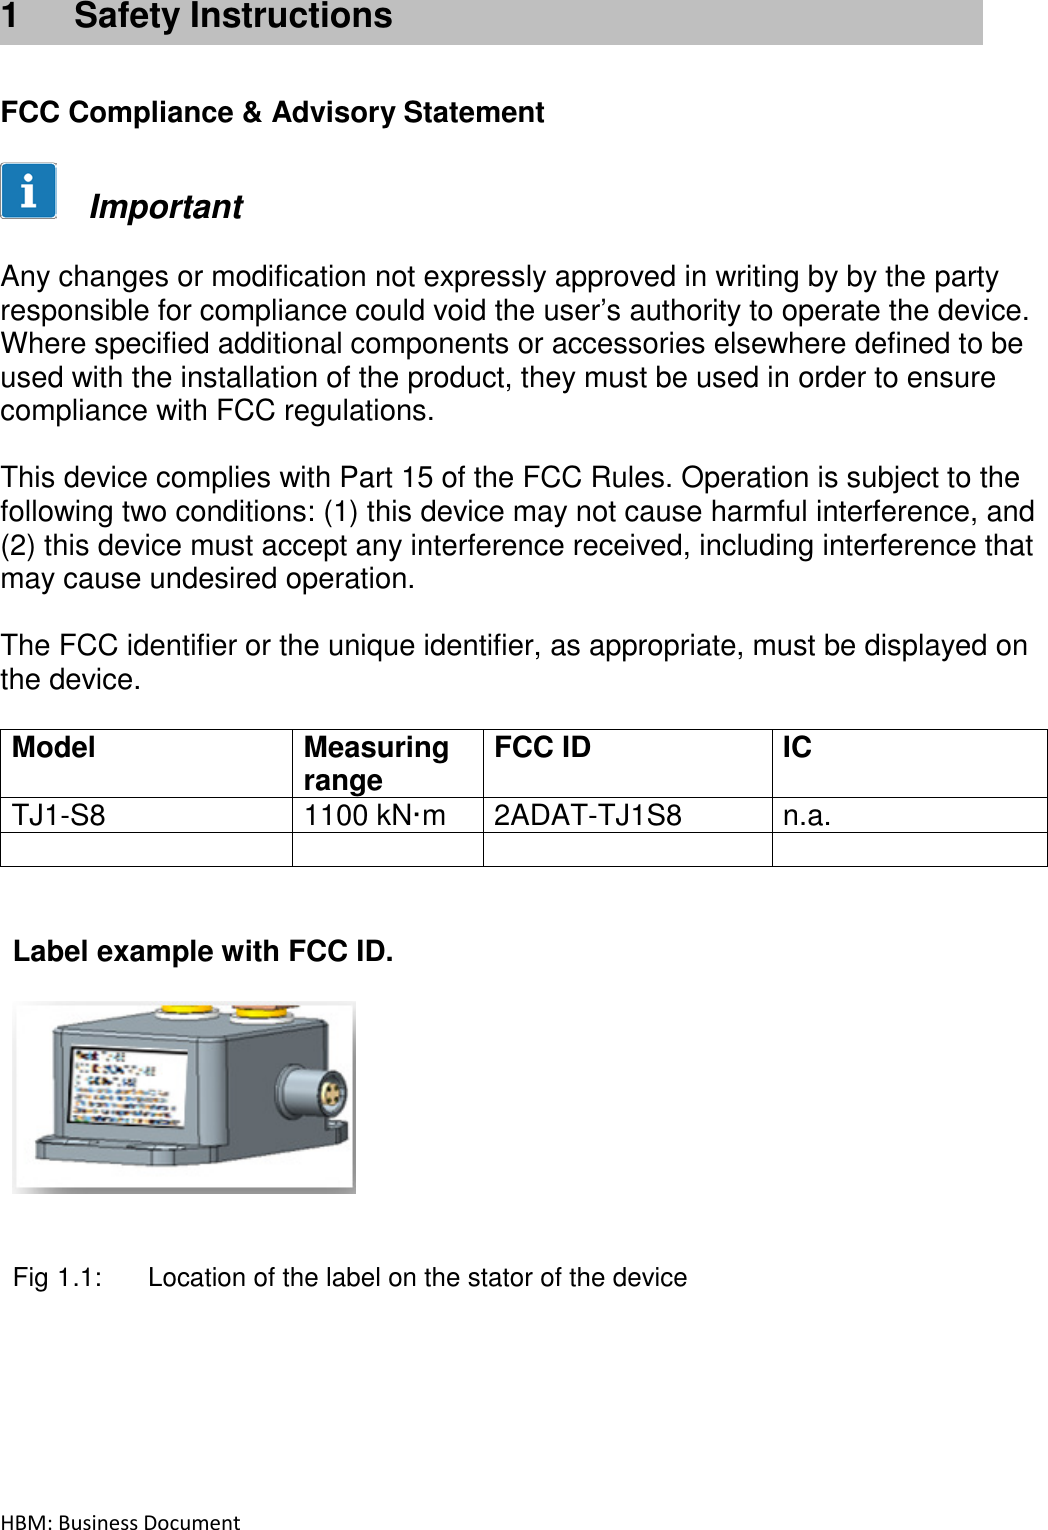 HBM: Business Document   1  Safety Instructions    FCC Compliance &amp; Advisory Statement        Important   Any changes or modification not expressly approved in writing by by the party responsible for compliance could void the user’s authority to operate the device. Where specified additional components or accessories elsewhere defined to be used with the installation of the product, they must be used in order to ensure compliance with FCC regulations.   This device complies with Part 15 of the FCC Rules. Operation is subject to the following two conditions: (1) this device may not cause harmful interference, and (2) this device must accept any interference received, including interference that may cause undesired operation.  The FCC identifier or the unique identifier, as appropriate, must be displayed on the device.  Model  Measuring range FCC ID  IC TJ1-S8  1100 kN·m  2ADAT-TJ1S8  n.a.          Label example with FCC ID.     Fig 1.1:  Location of the label on the stator of the device    